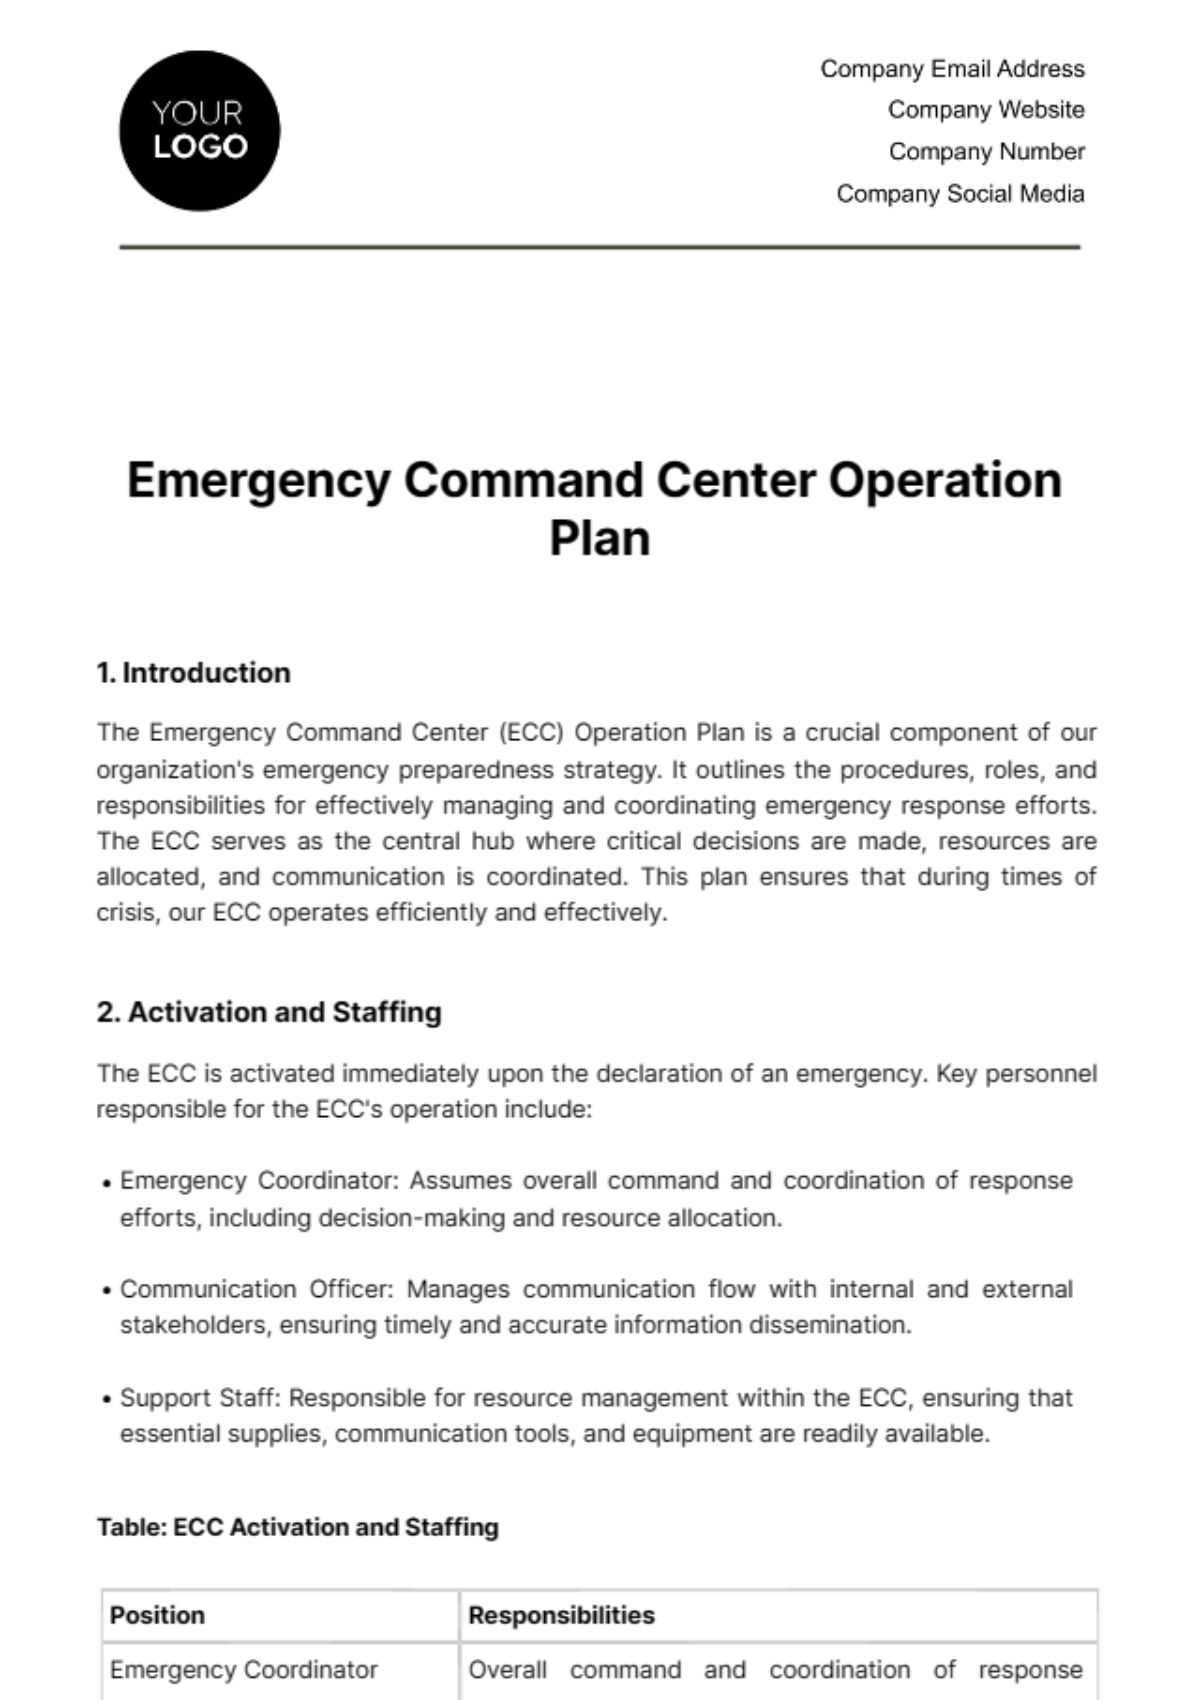 Free Emergency Command Center Operation Plan Template